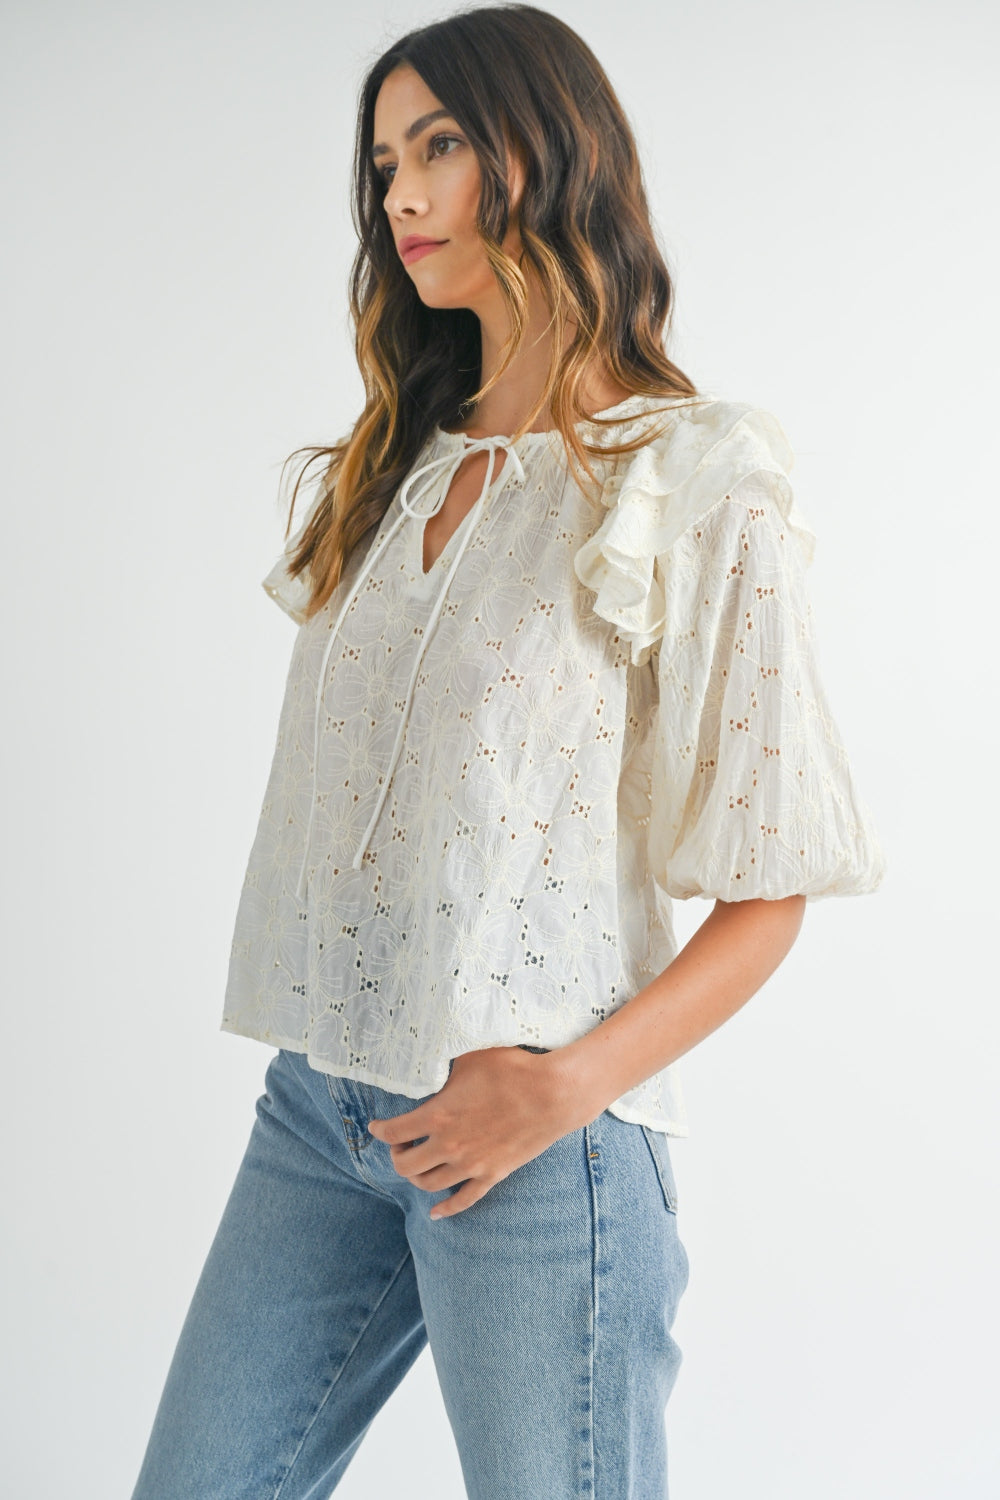 MABLE Eyelet Lace Ruffle Shoulder Puff Sleeve Blouse Dress